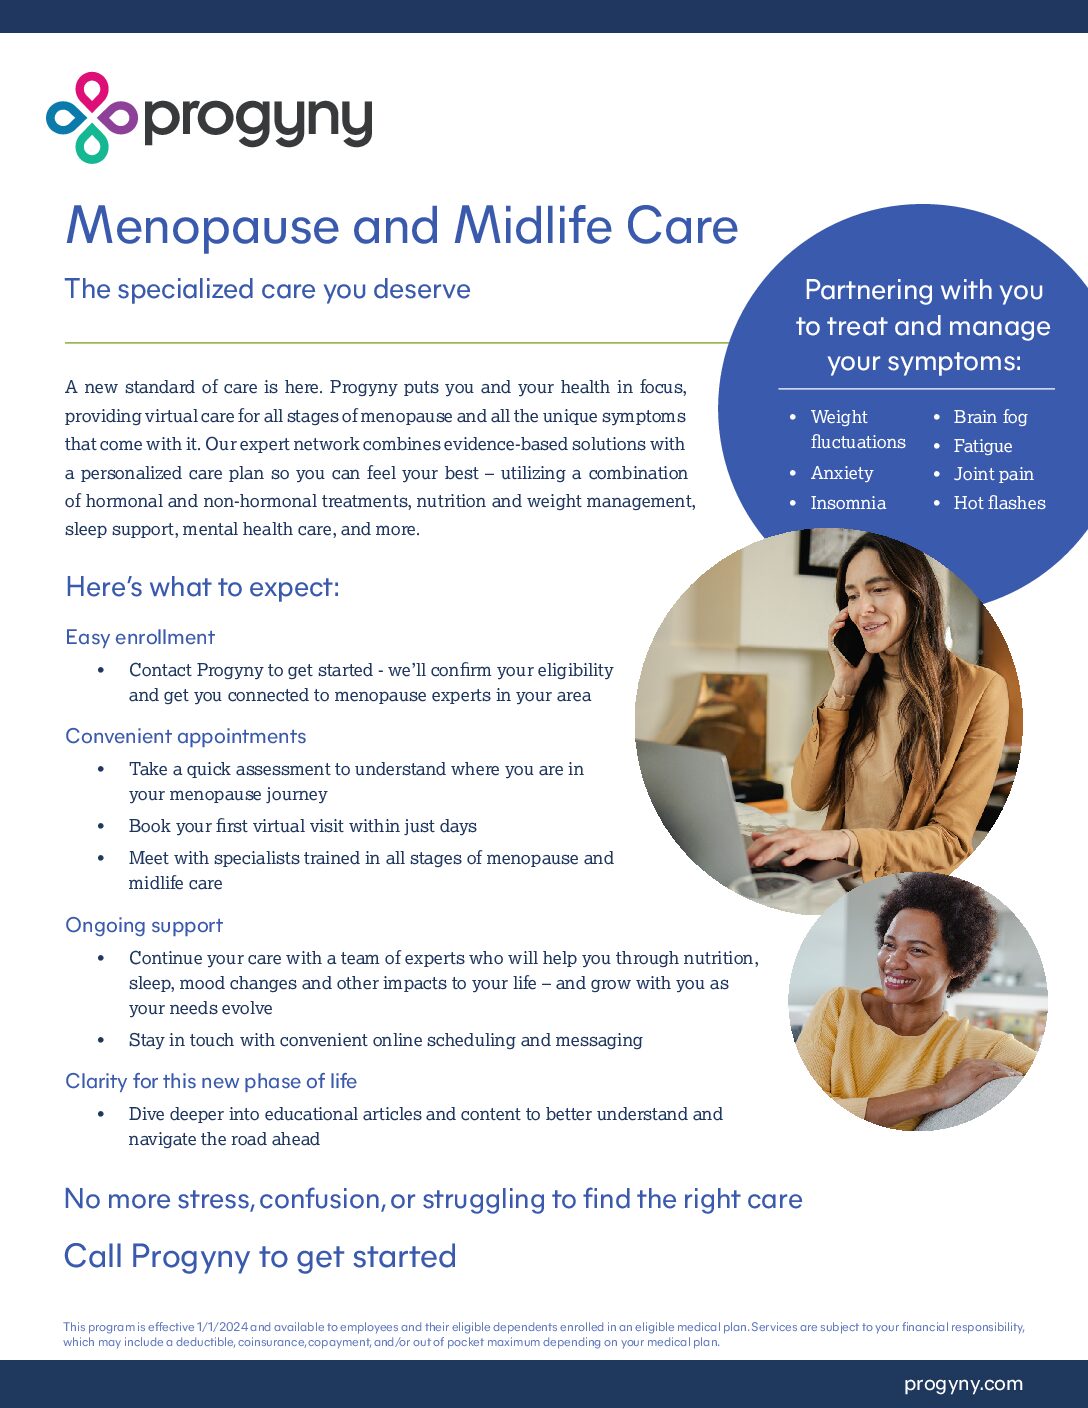 Progyny_Menopause_and_Midlife_Care_What_To_Expect-pdf